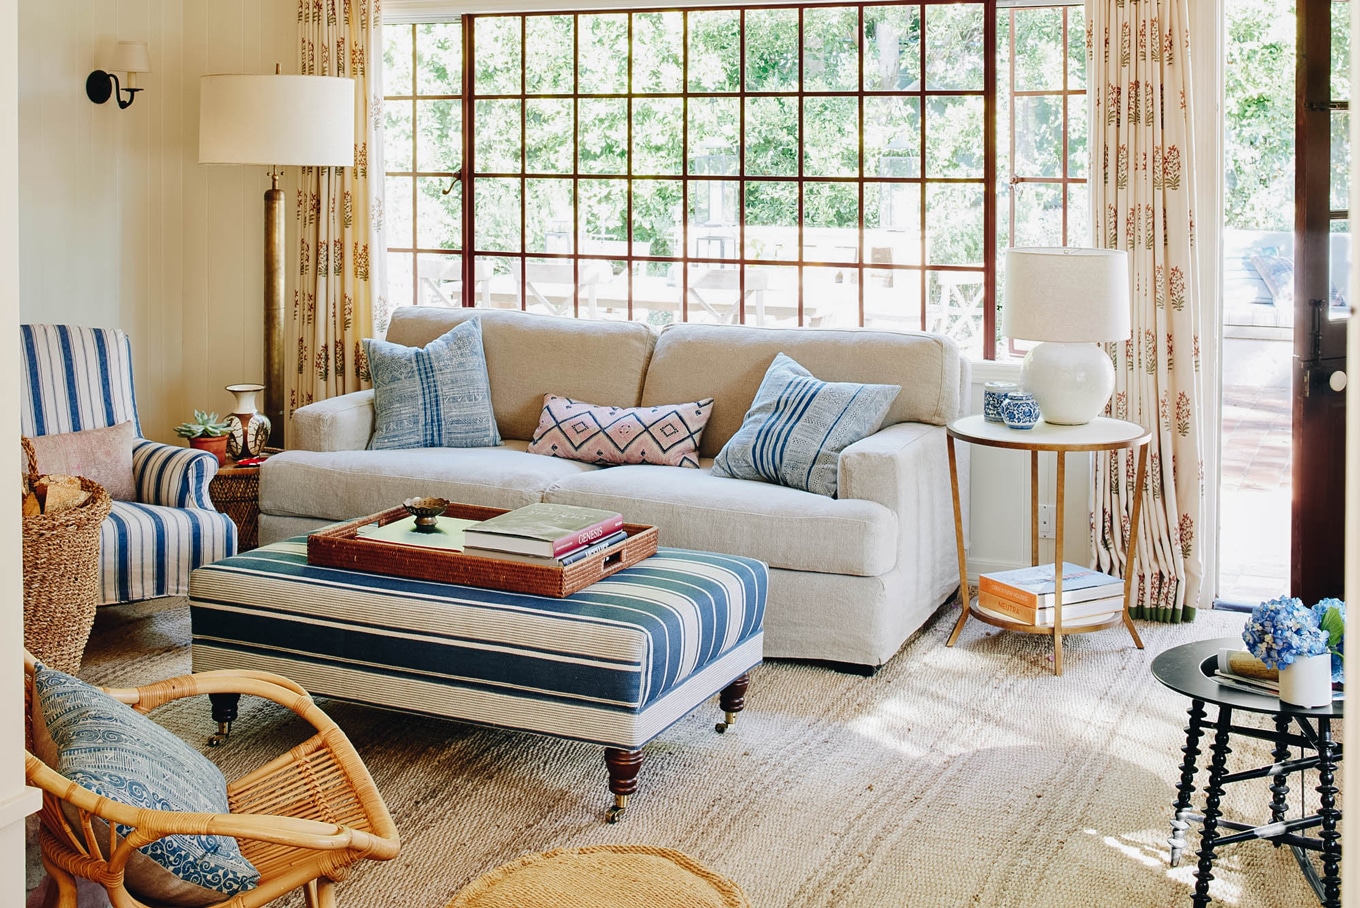 layered textiles and stripes in a casual sitting area | california hacienda house tour on coco kelley